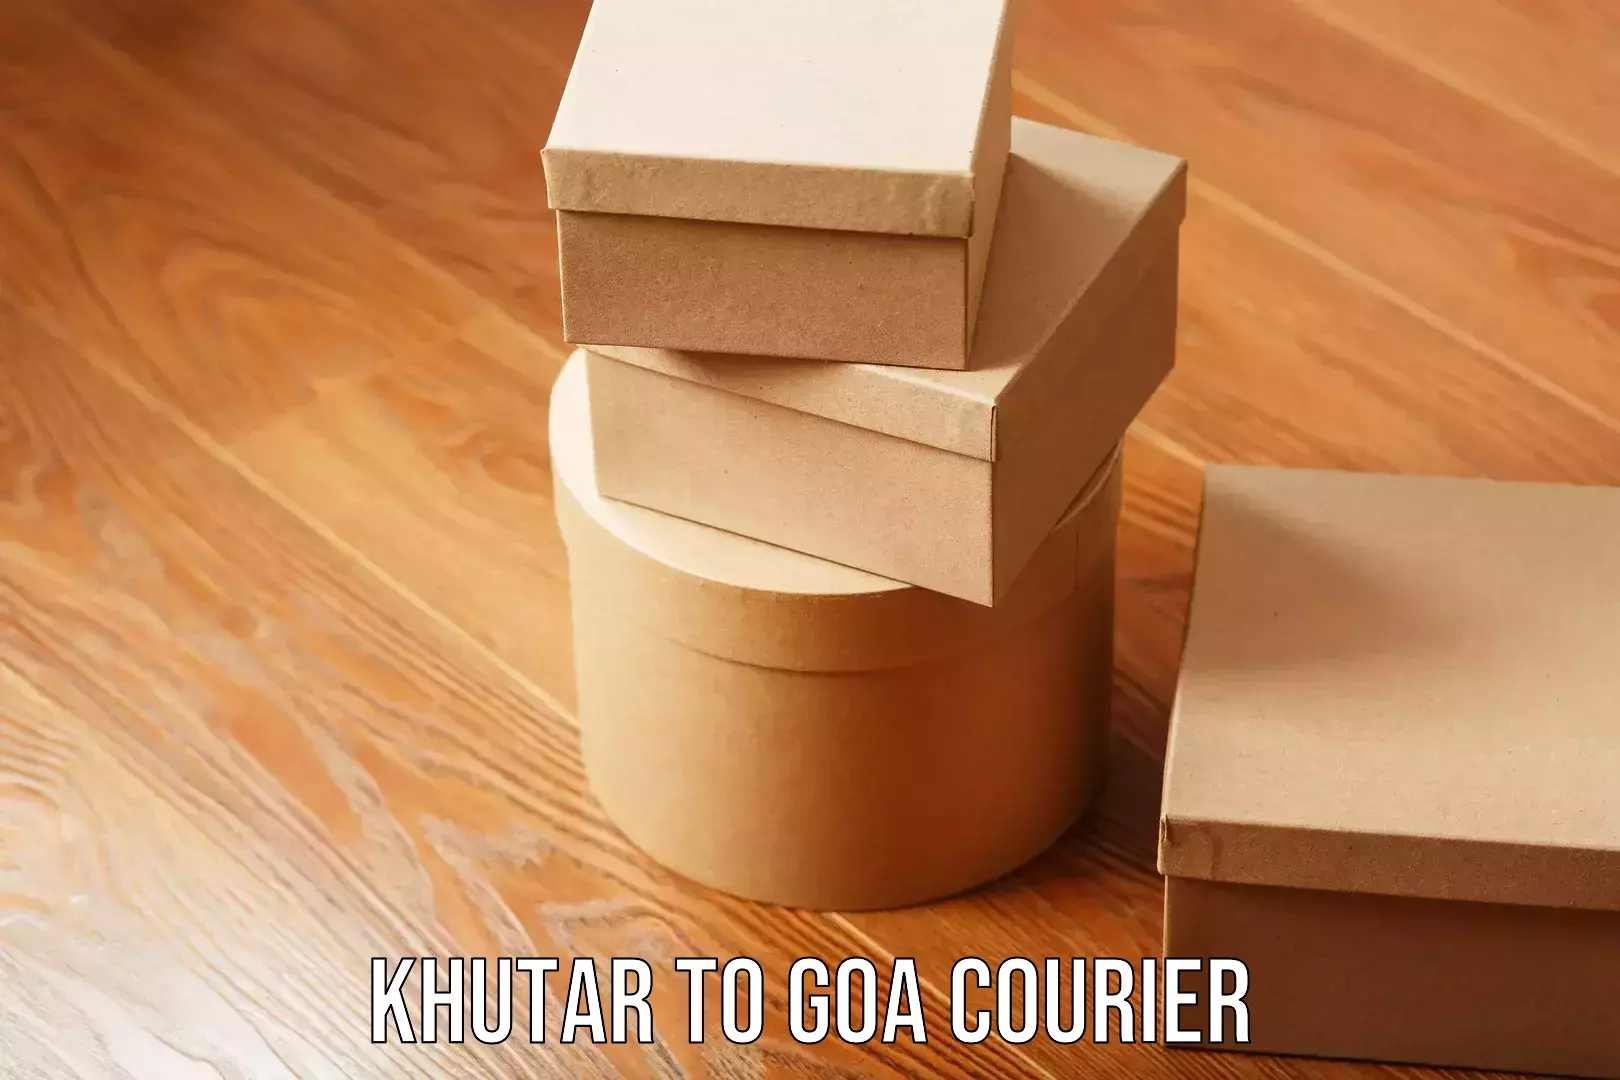 Efficient moving company Khutar to Goa